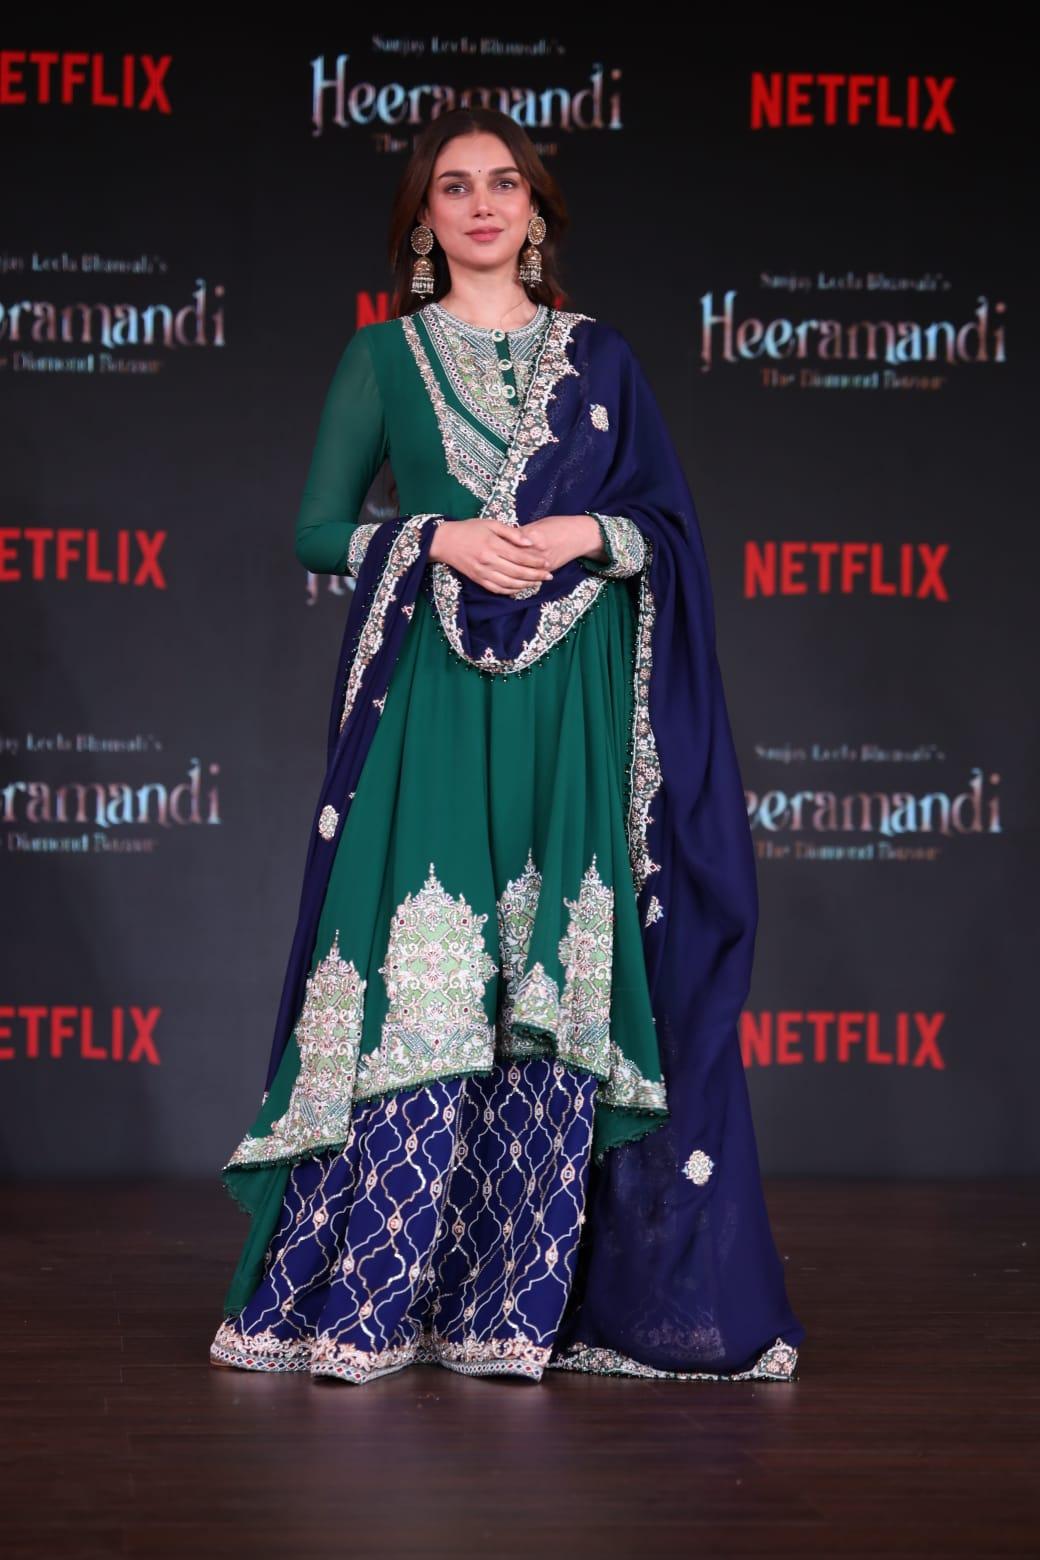 Aditi Rao Hydari, who recently got engaged to long-term boyfriend Siddharth, was seen wearing a heavy suit at the Heeramandi trailer launch event